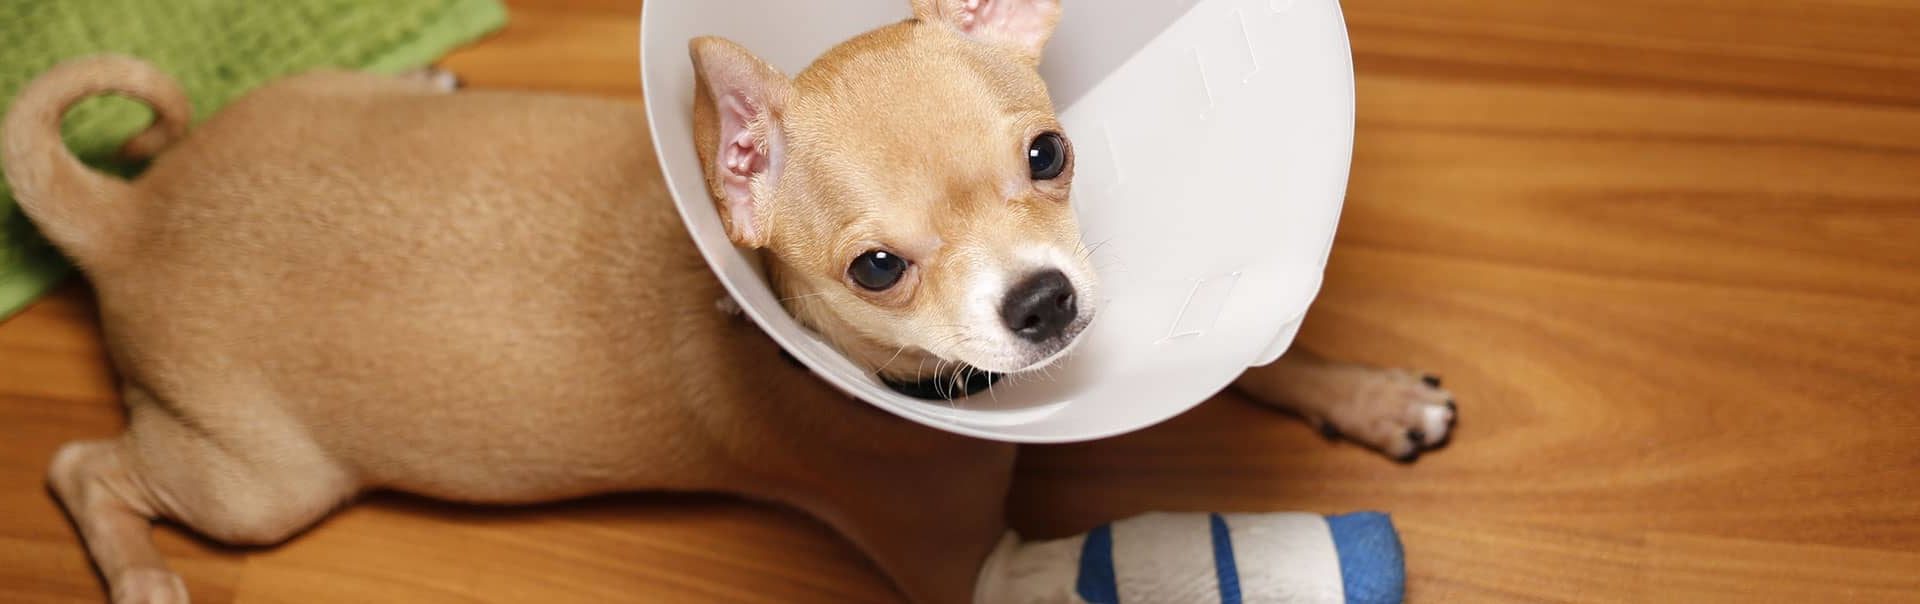 Dog with bandaged arm and wearing a cone